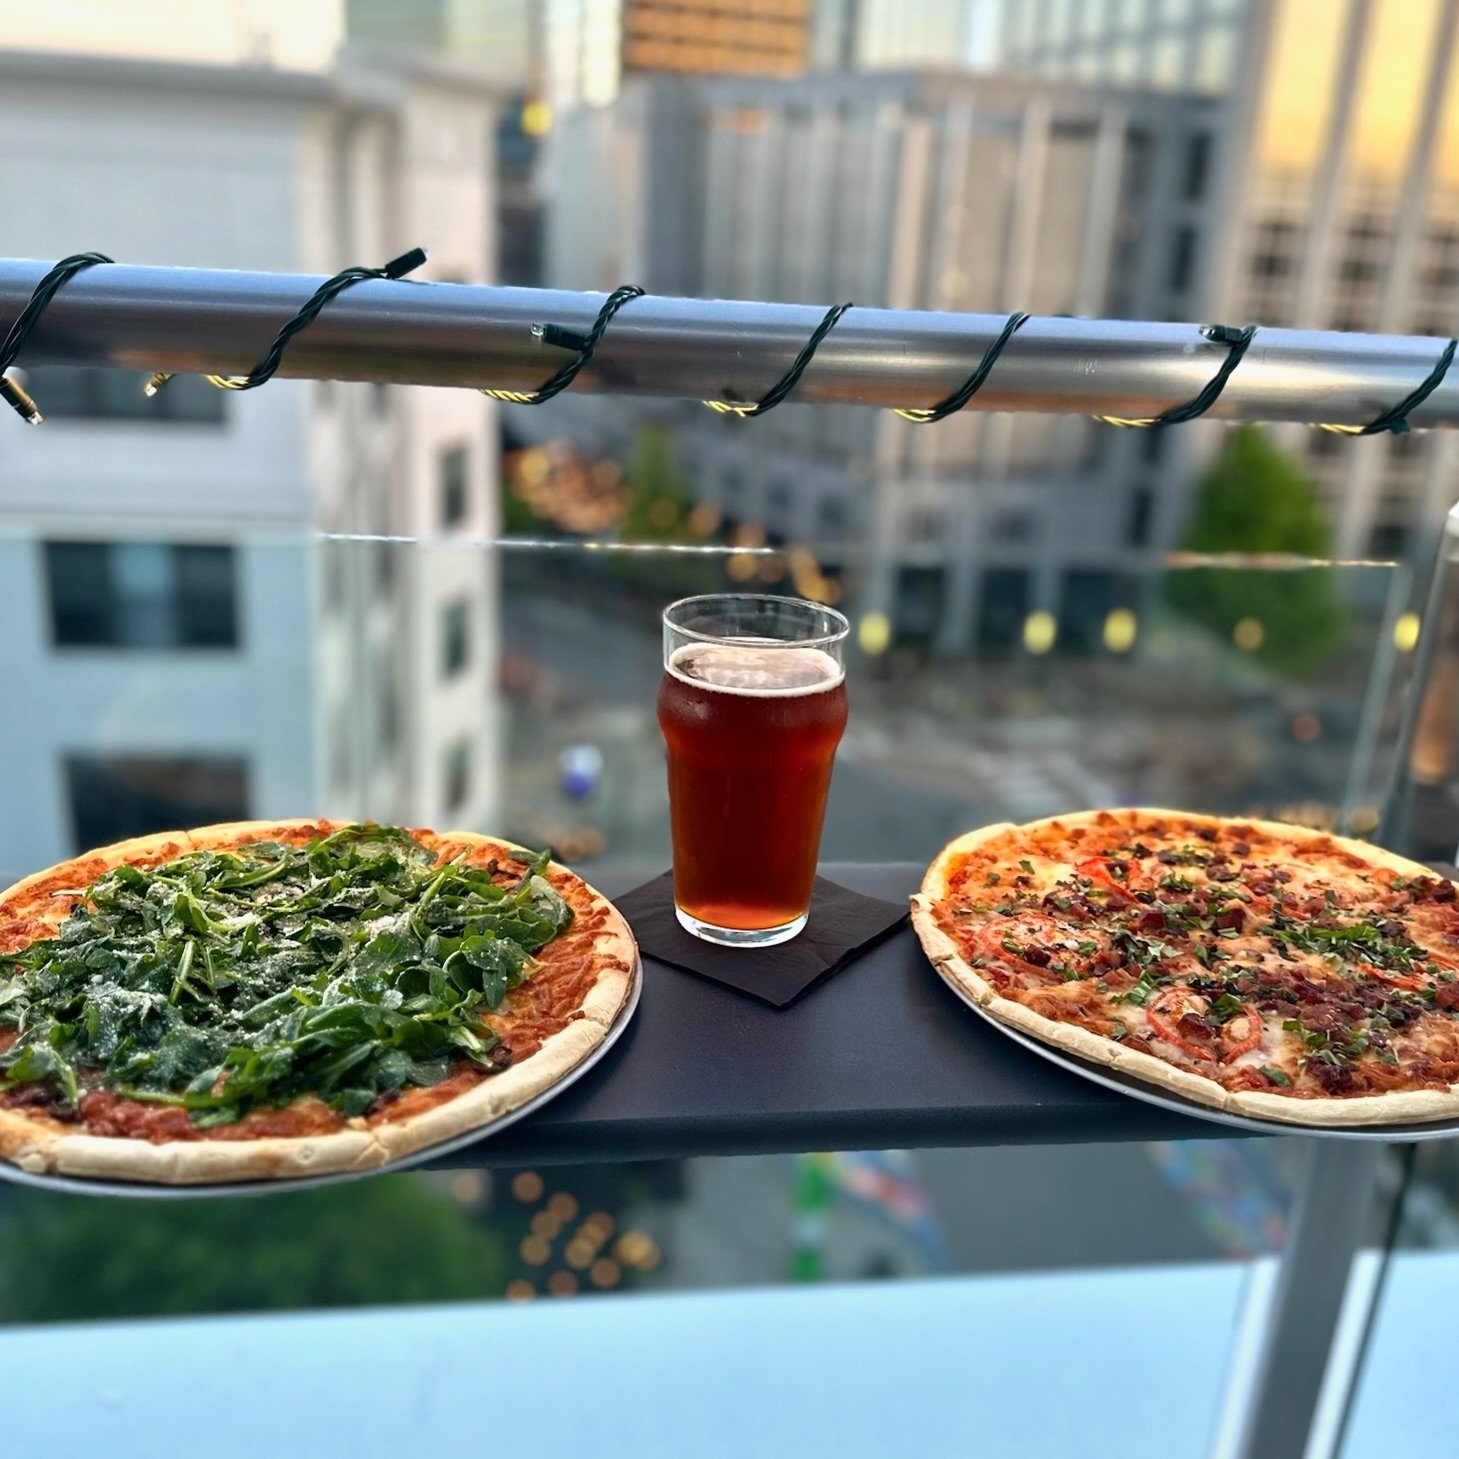 It&rsquo;s a Gimme, Gimme that sunshine&hellip; pizza and a beer kinda night! ☀️🍕🍺

Come up and join us on the 7th floor of @achotelraleigh  before or after music in the park, we&rsquo;re open until 11pm 
&bull;
&bull;

📍 AC HOTEL
Level7 Rooftop B